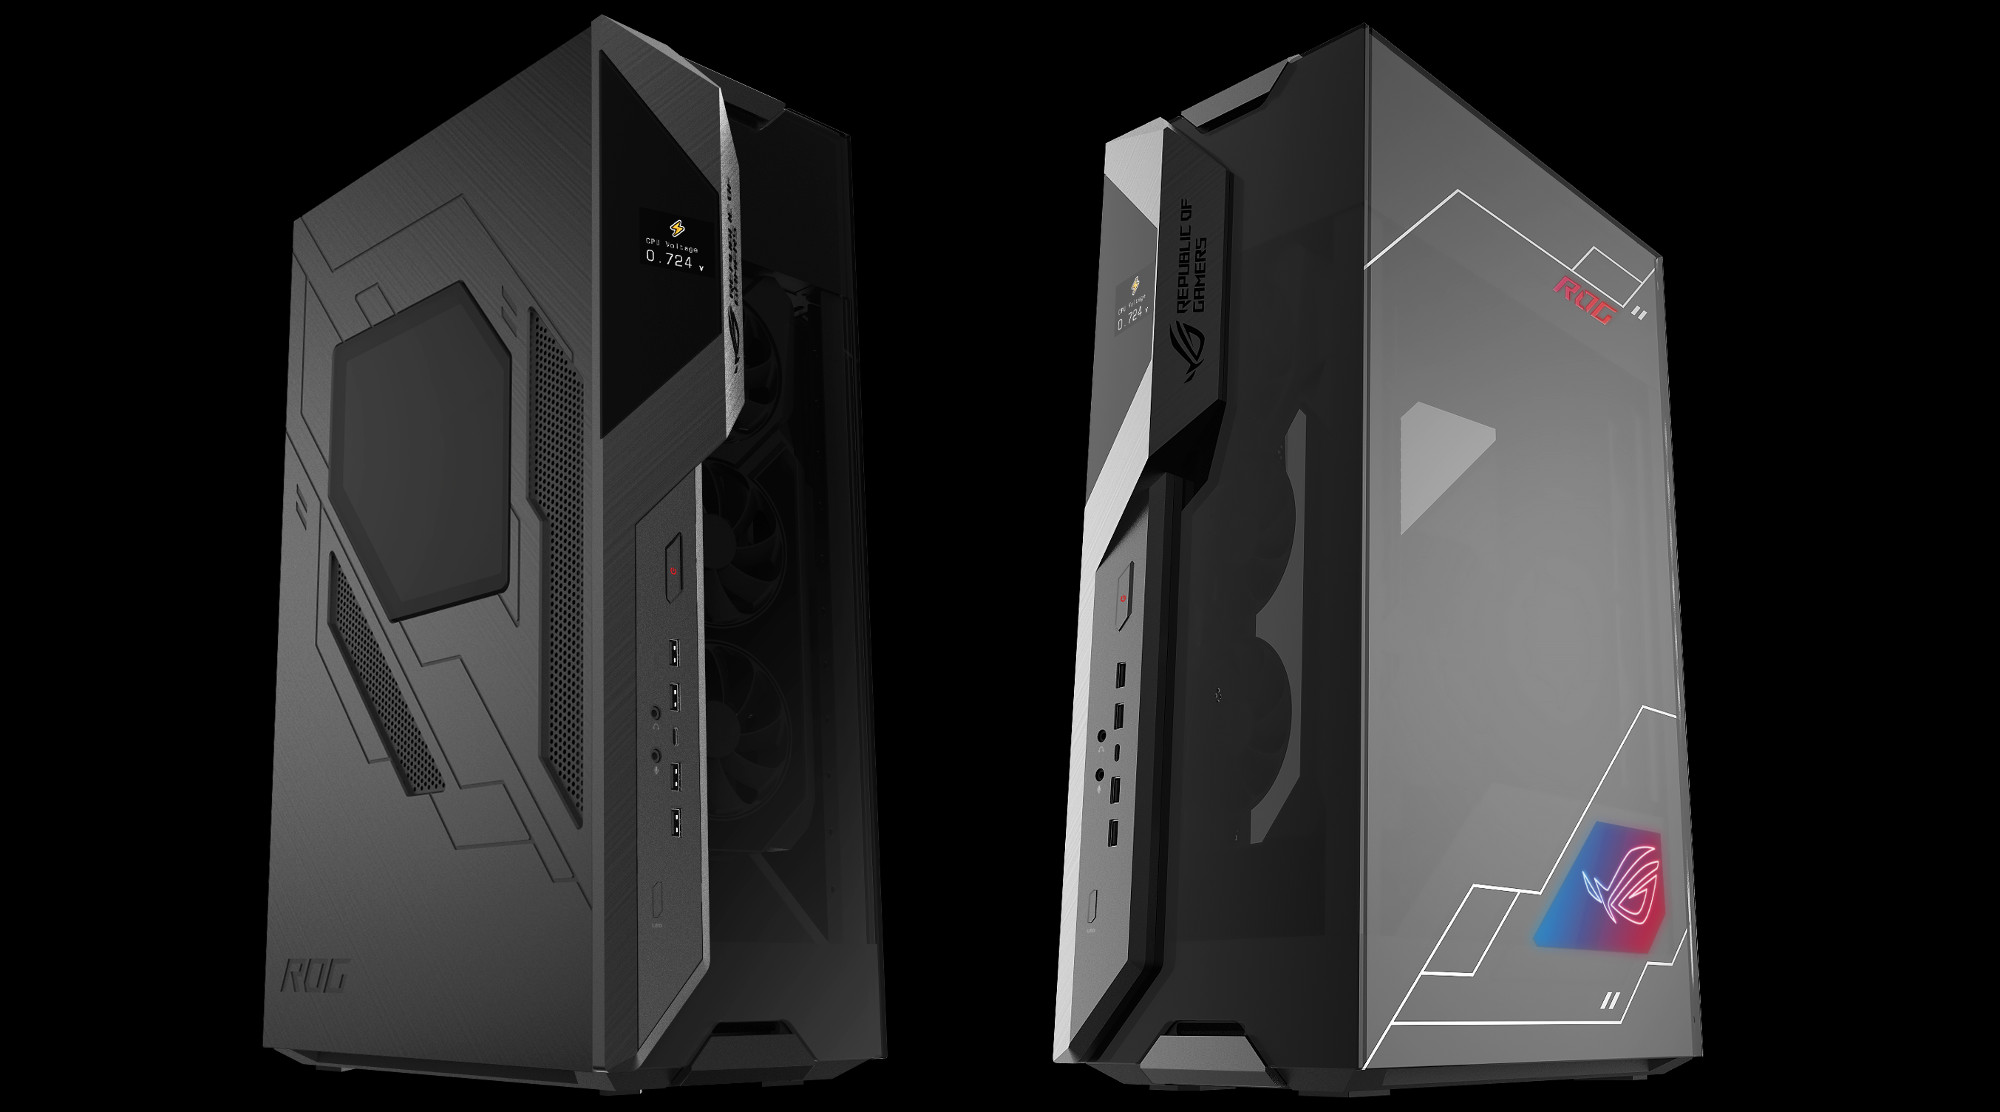 The ROG ITX concept case is designed for serious enthusiasts